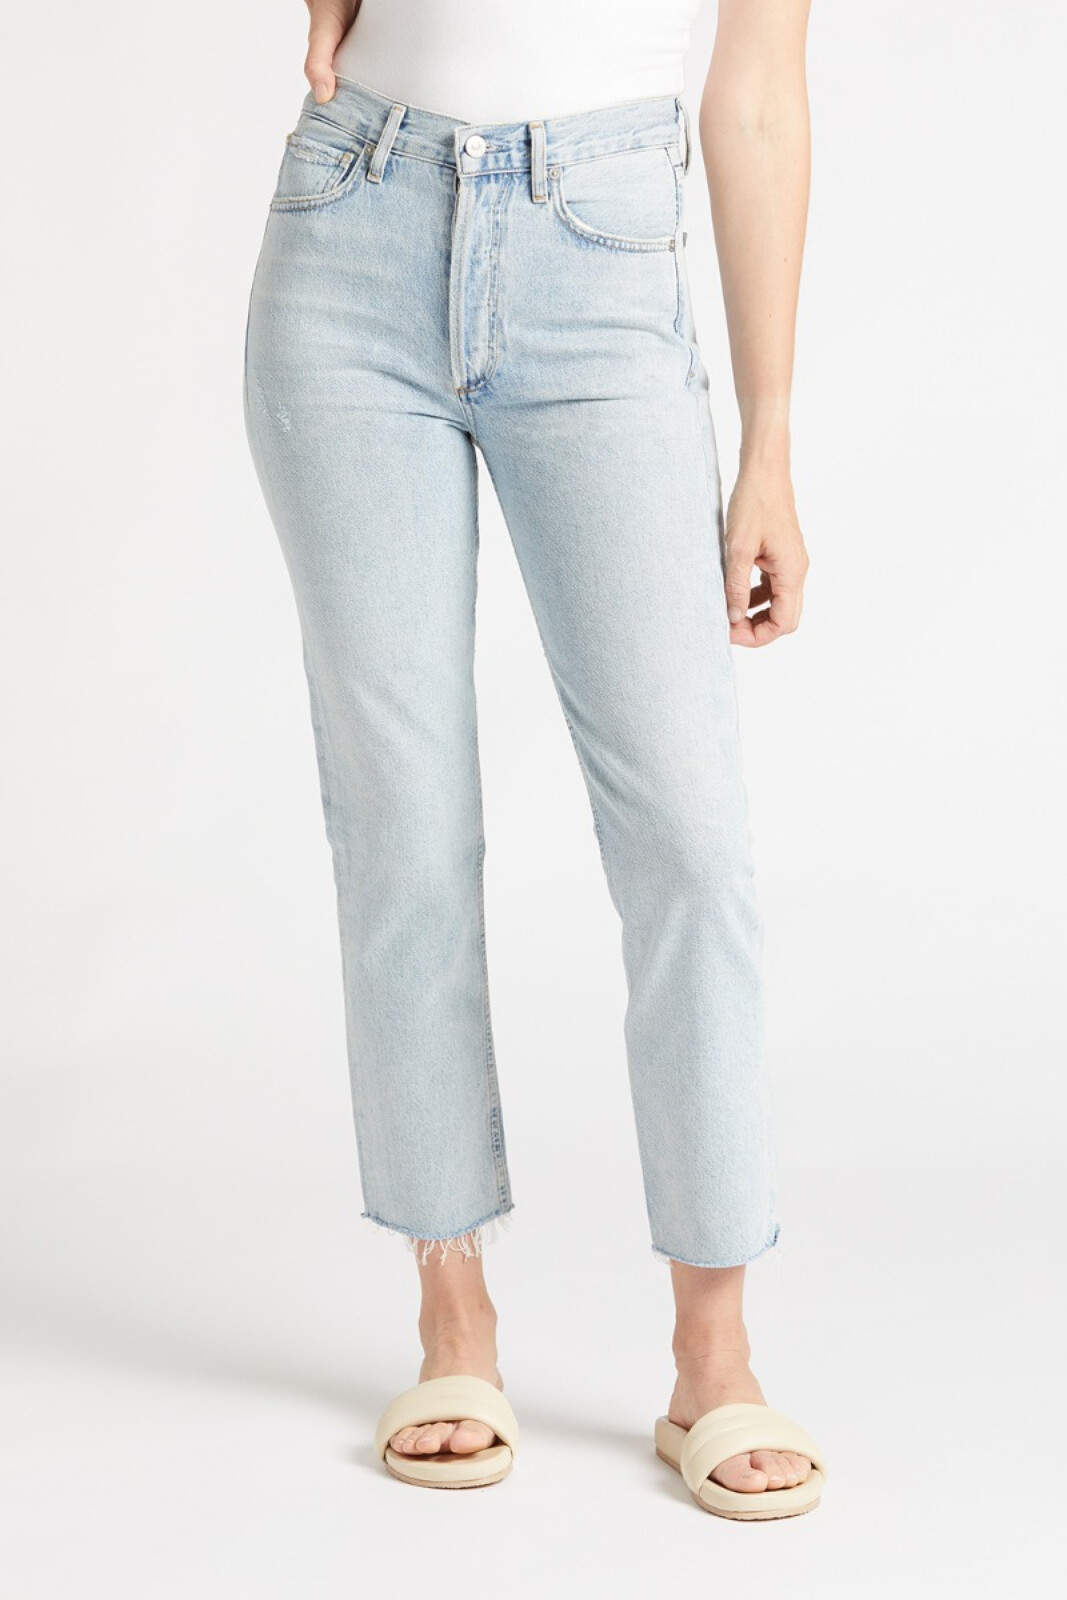 Citizens of Humanity Emerson High Rise Ripped Boyfriend Jeans in Slushie |  Bloomingdale's